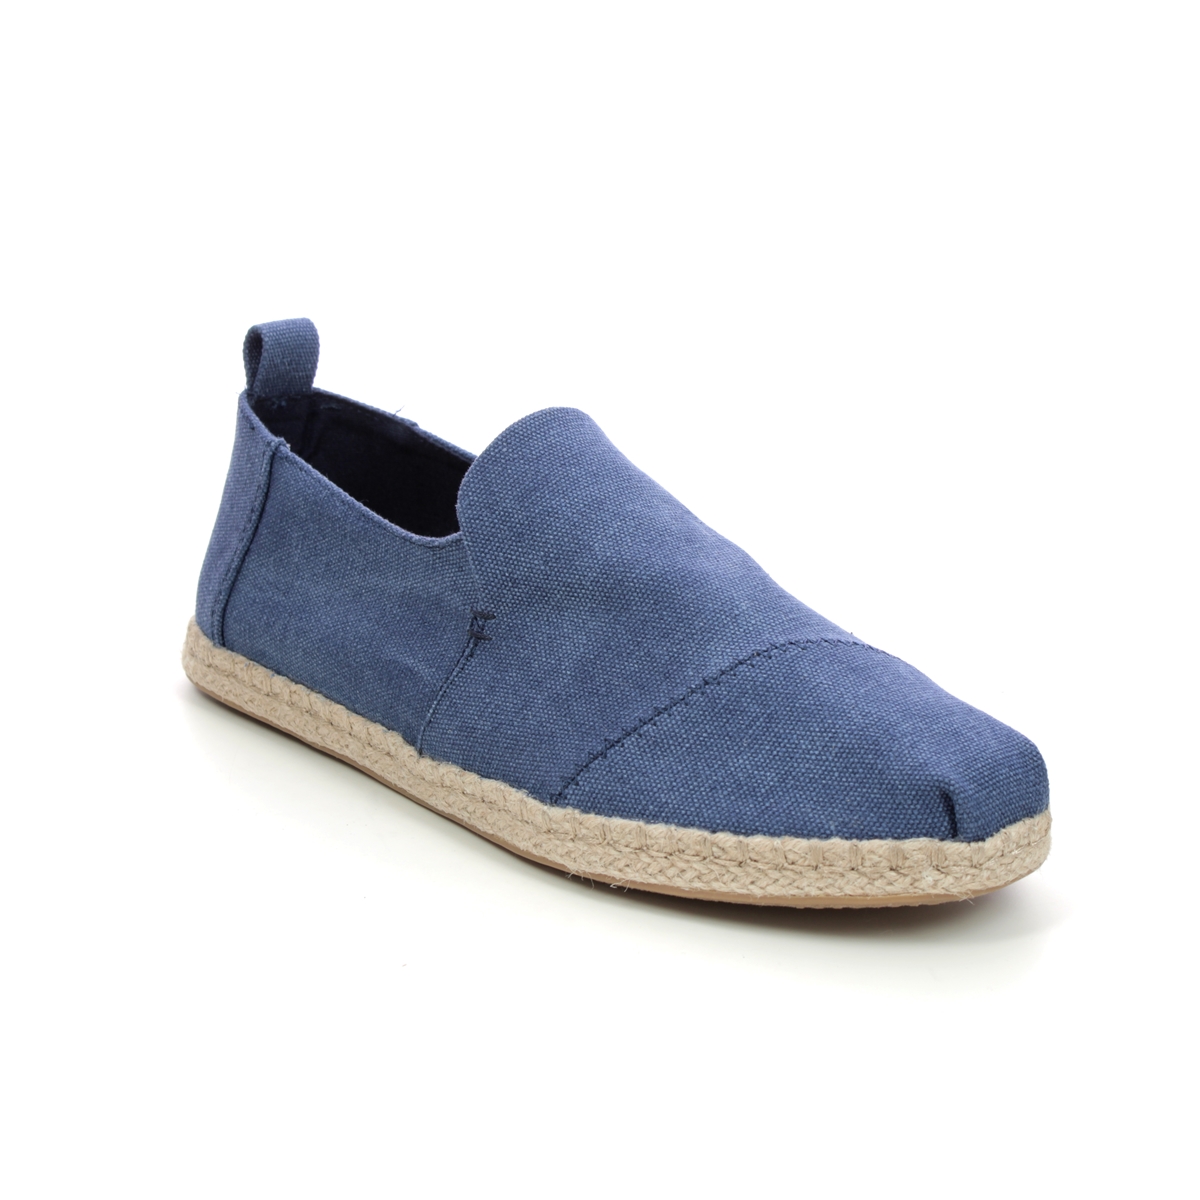 Toms Deconstructed Navy Mens Slip-on Shoes 10011623-70 in a Plain Canvas in Size 8.5